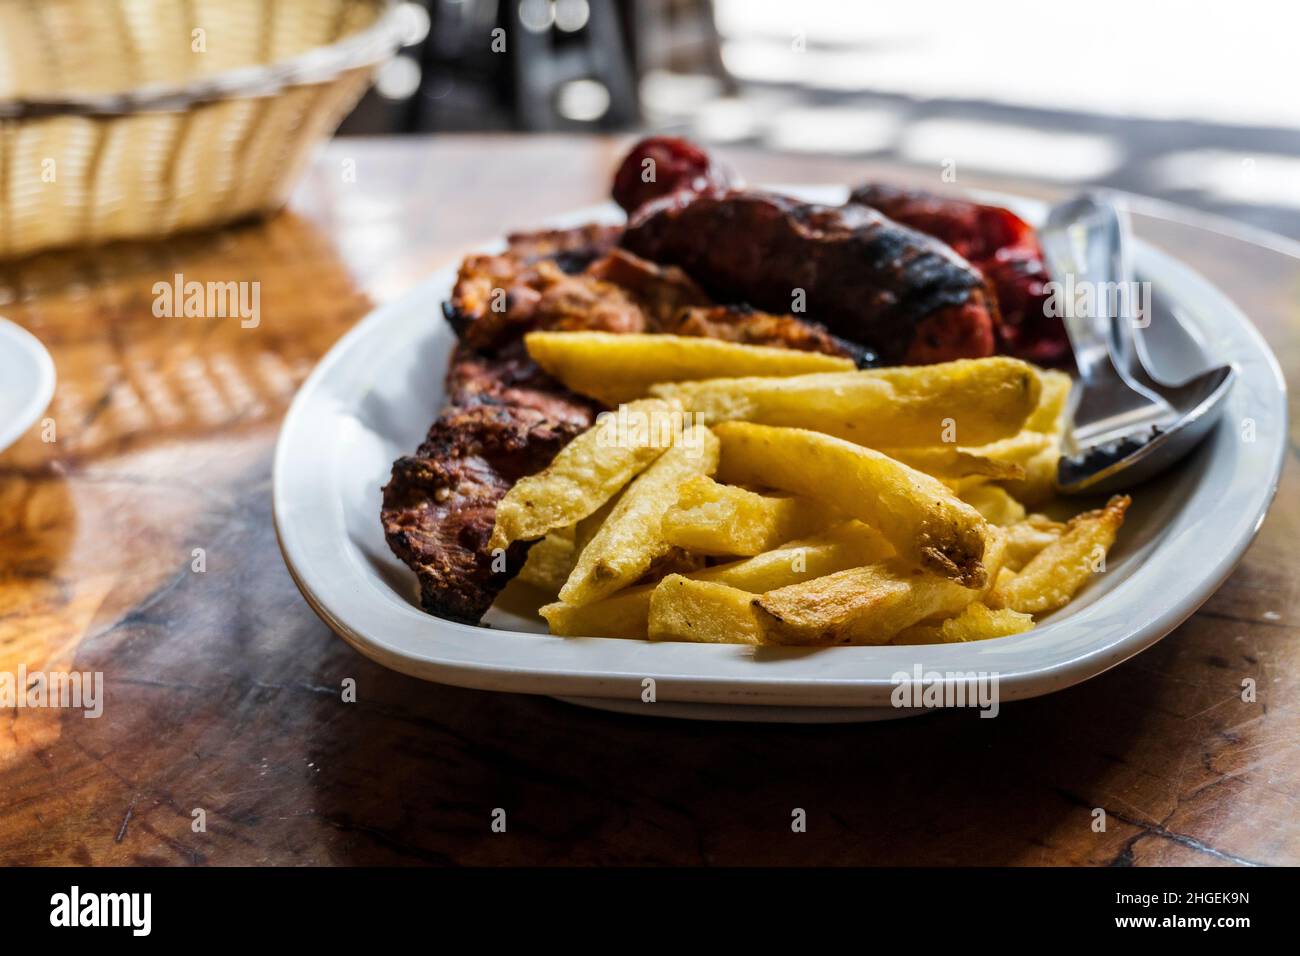 Sausage, veal and pork meat barbecued and served with french fries on Gran Canaria, Spain Stock Photo